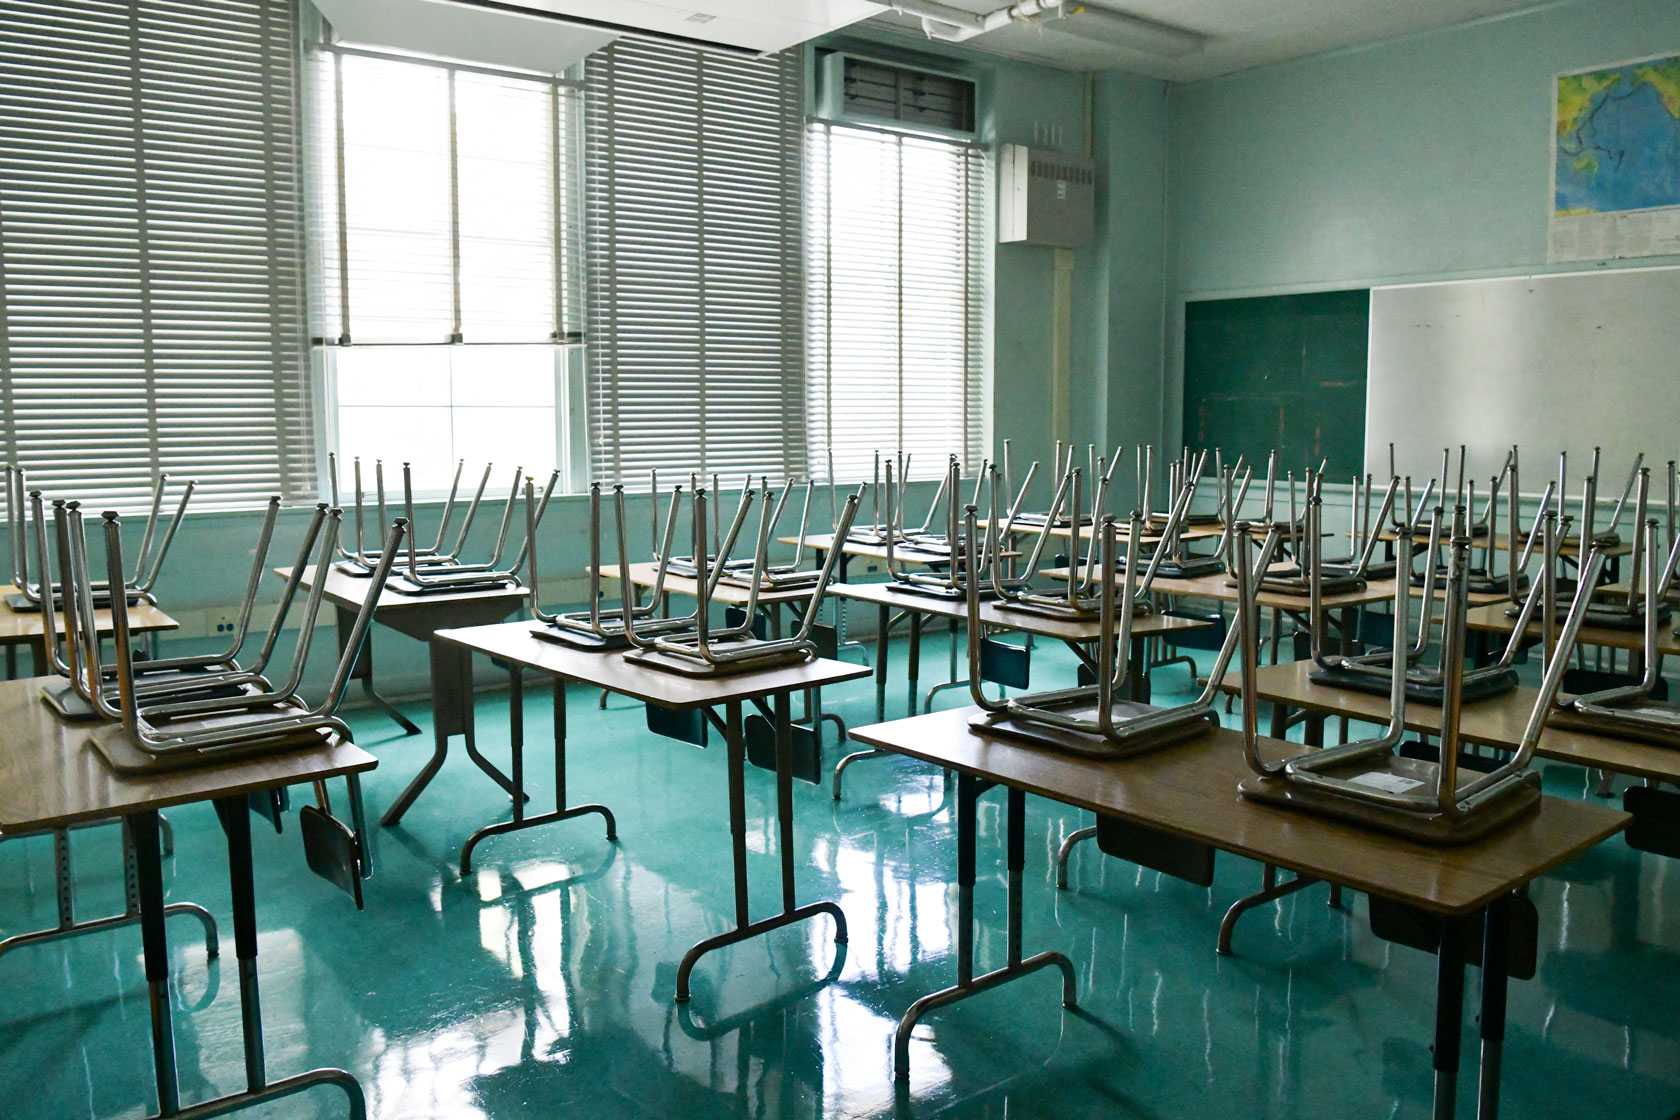 Photo shows an empty classroom with chairs stacked on top of the desks.